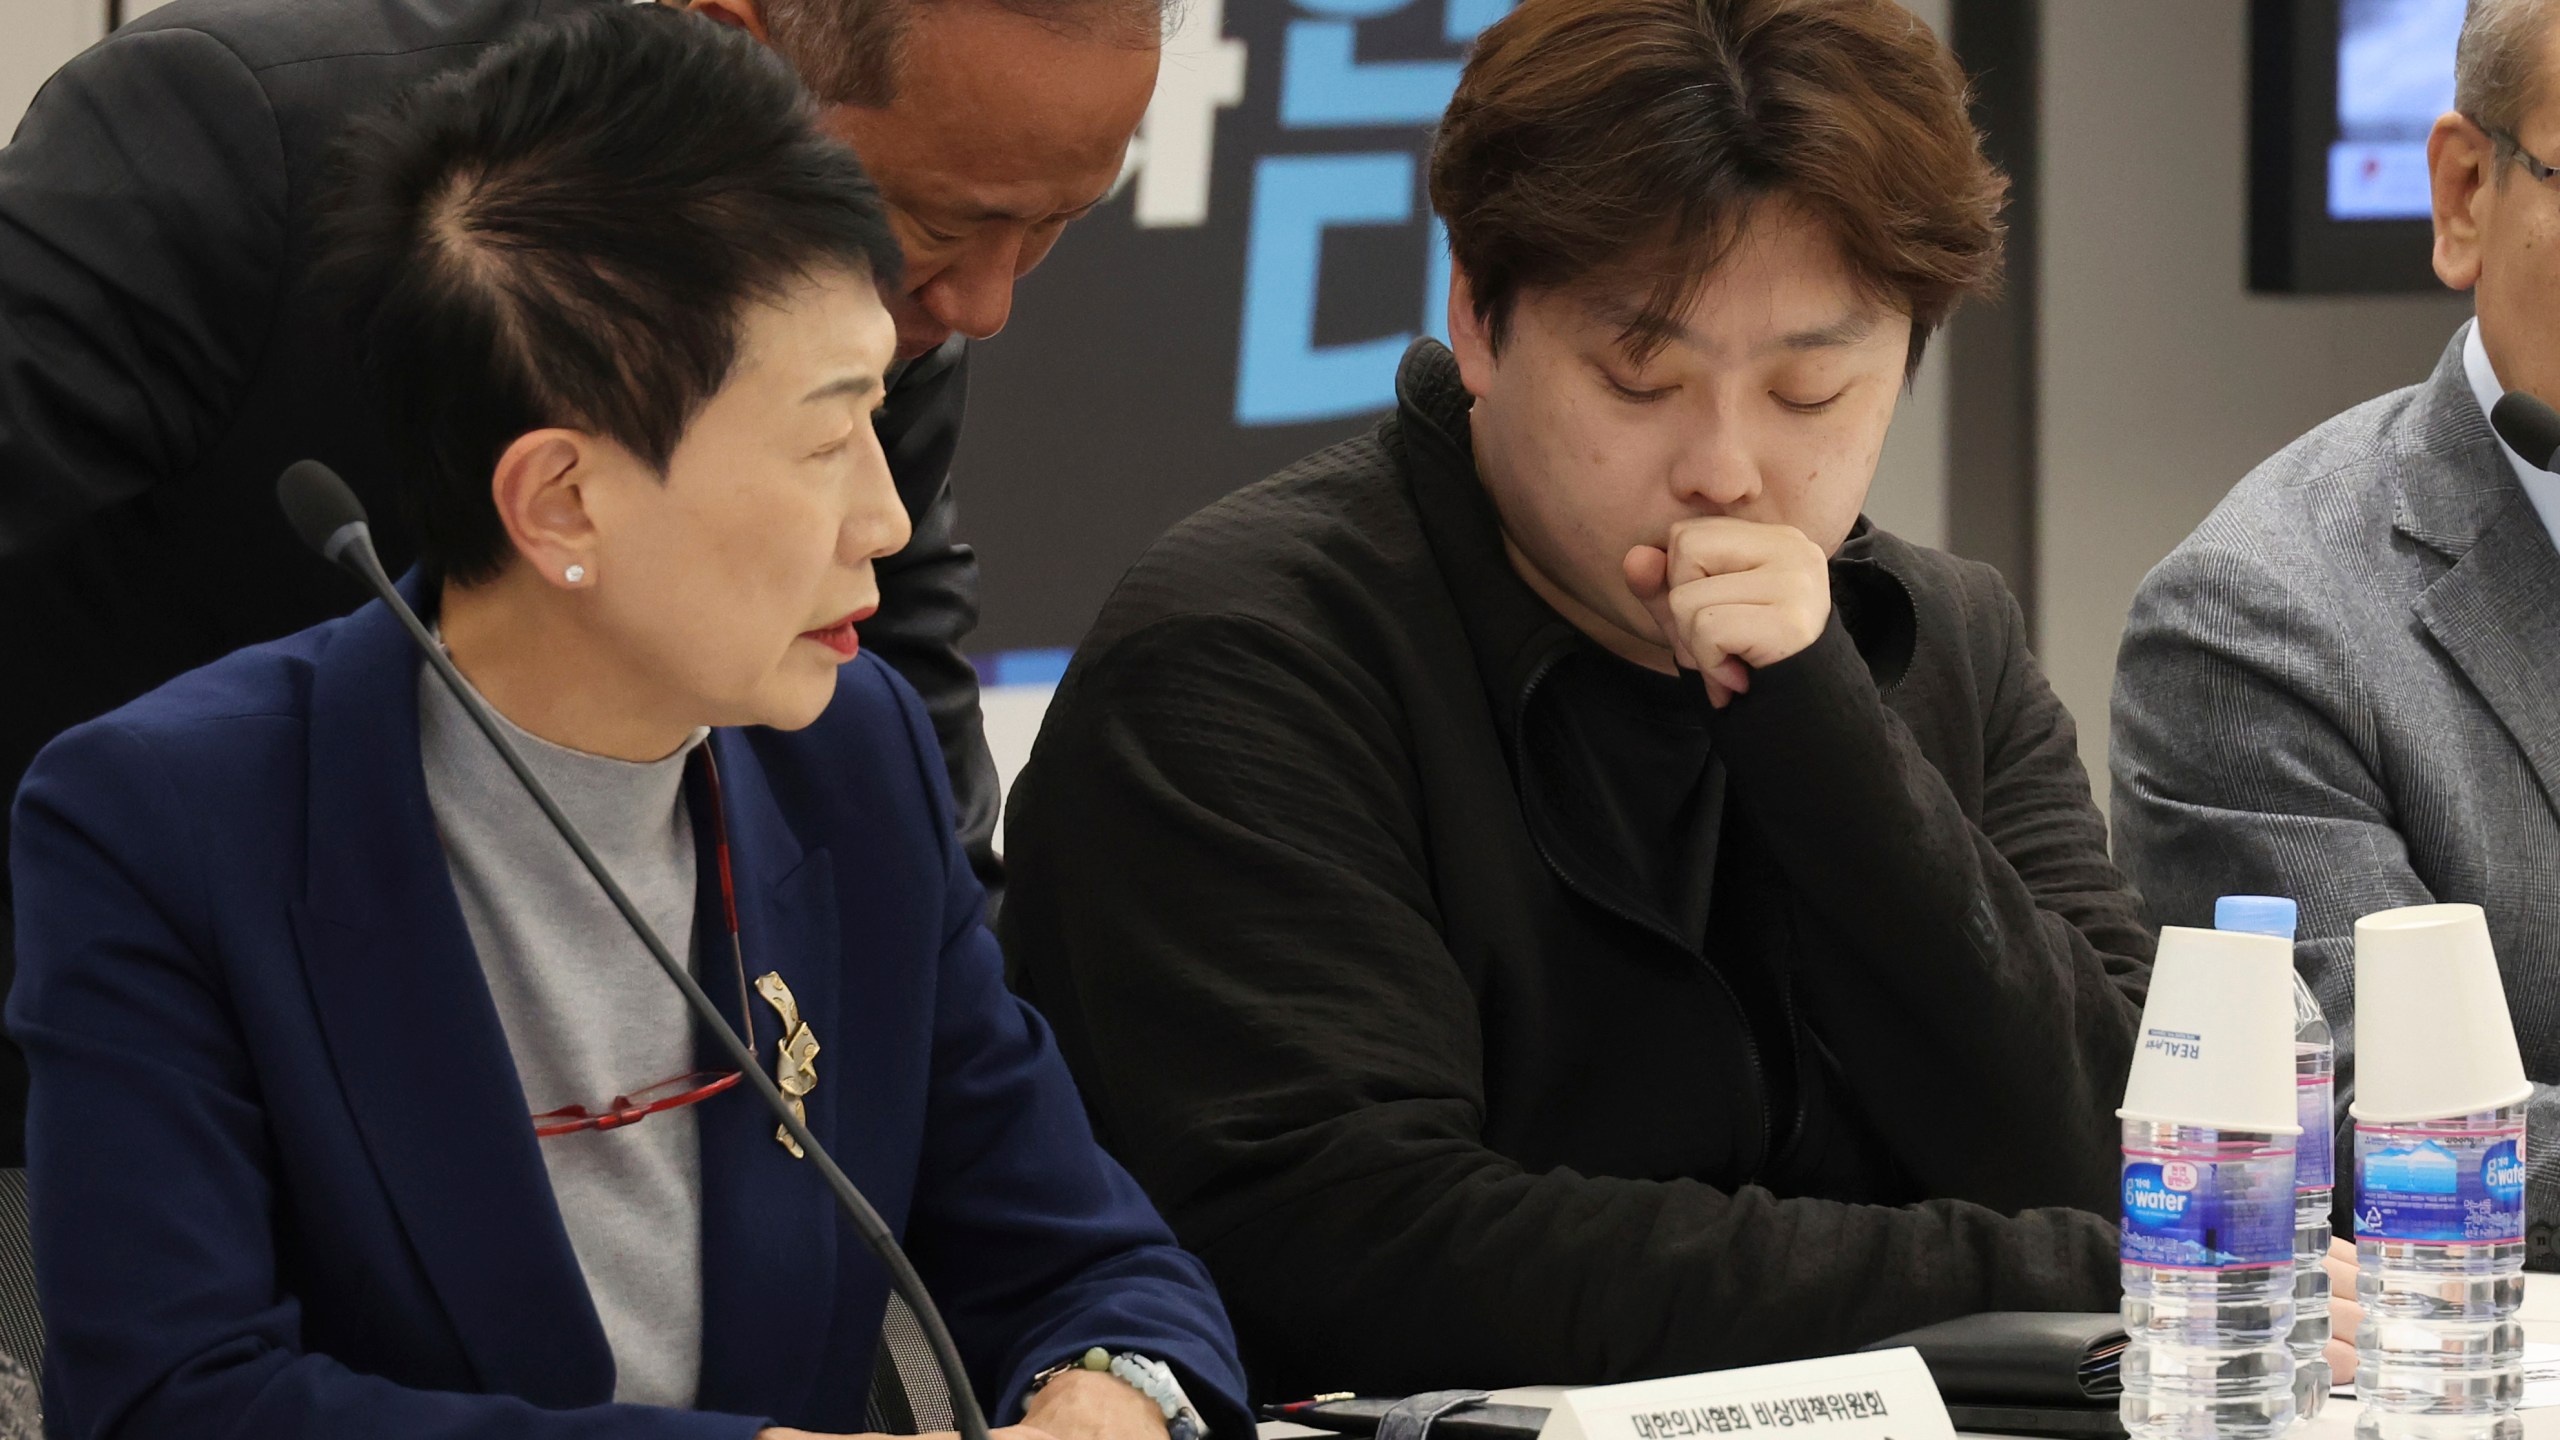 Park Dan, head of an emergency committee at the Korean Intern Resident Association, center right, is seen during a meeting at the Korean Medical Association in Seoul, South Korea, March 31, 2024. South Korea’s president Yoon Suk Yeol met the leader of thousands of striking junior doctors on Thursday, April 4, 2024, and promised to respect their position during future talks over his contentious push to sharply increase medical school admissions. The meeting between President Yoon Suk Yeol and Park Dan, head of an emergency committee for the Korea Intern Resident Association, was the first of its kind since more than 90% of the country’s 13,000 trainee doctors walked off the job in February, disrupting hospital operations. (Choi Jae-gu/Yonhap via AP)